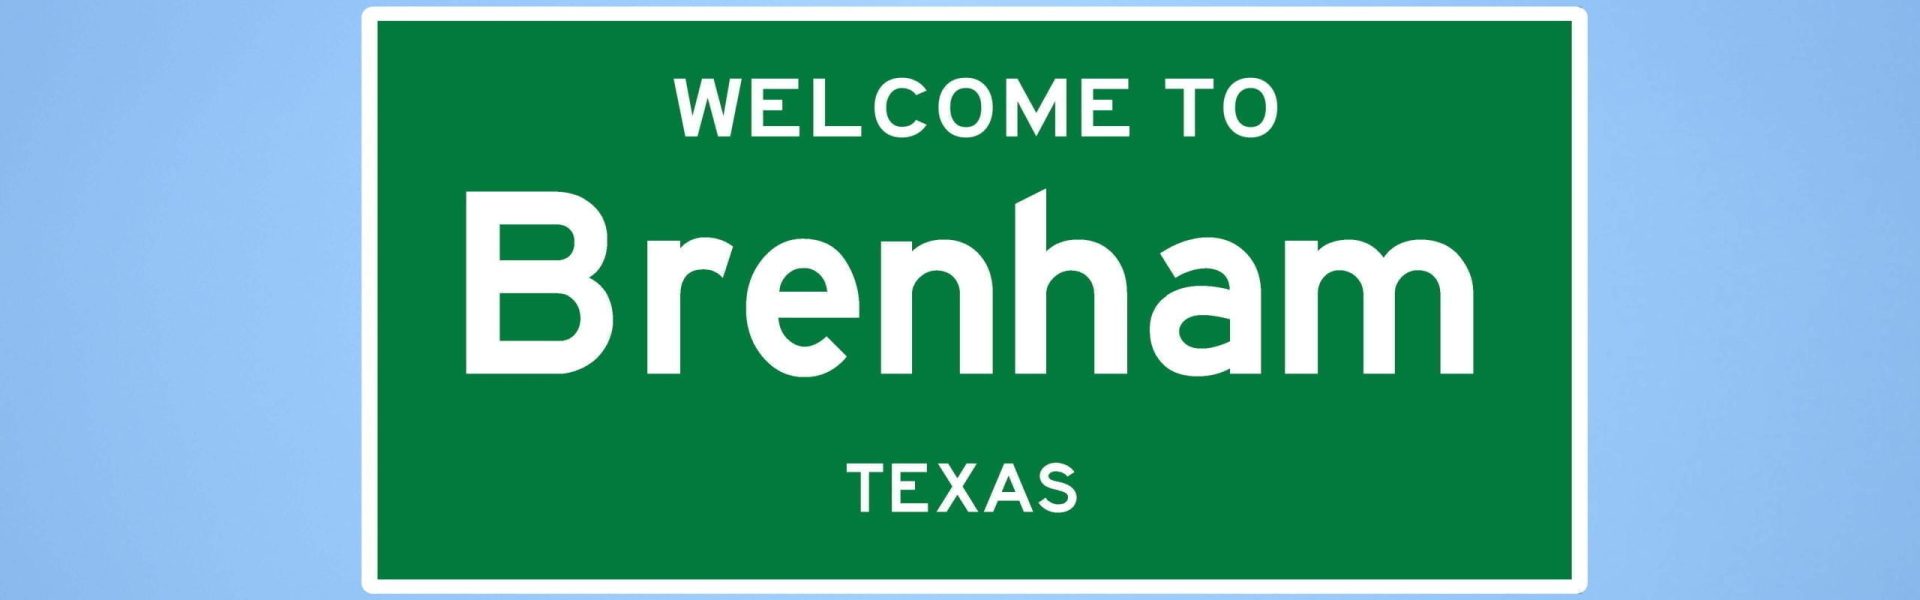 sign that says "Welcome to Brenham Texas"